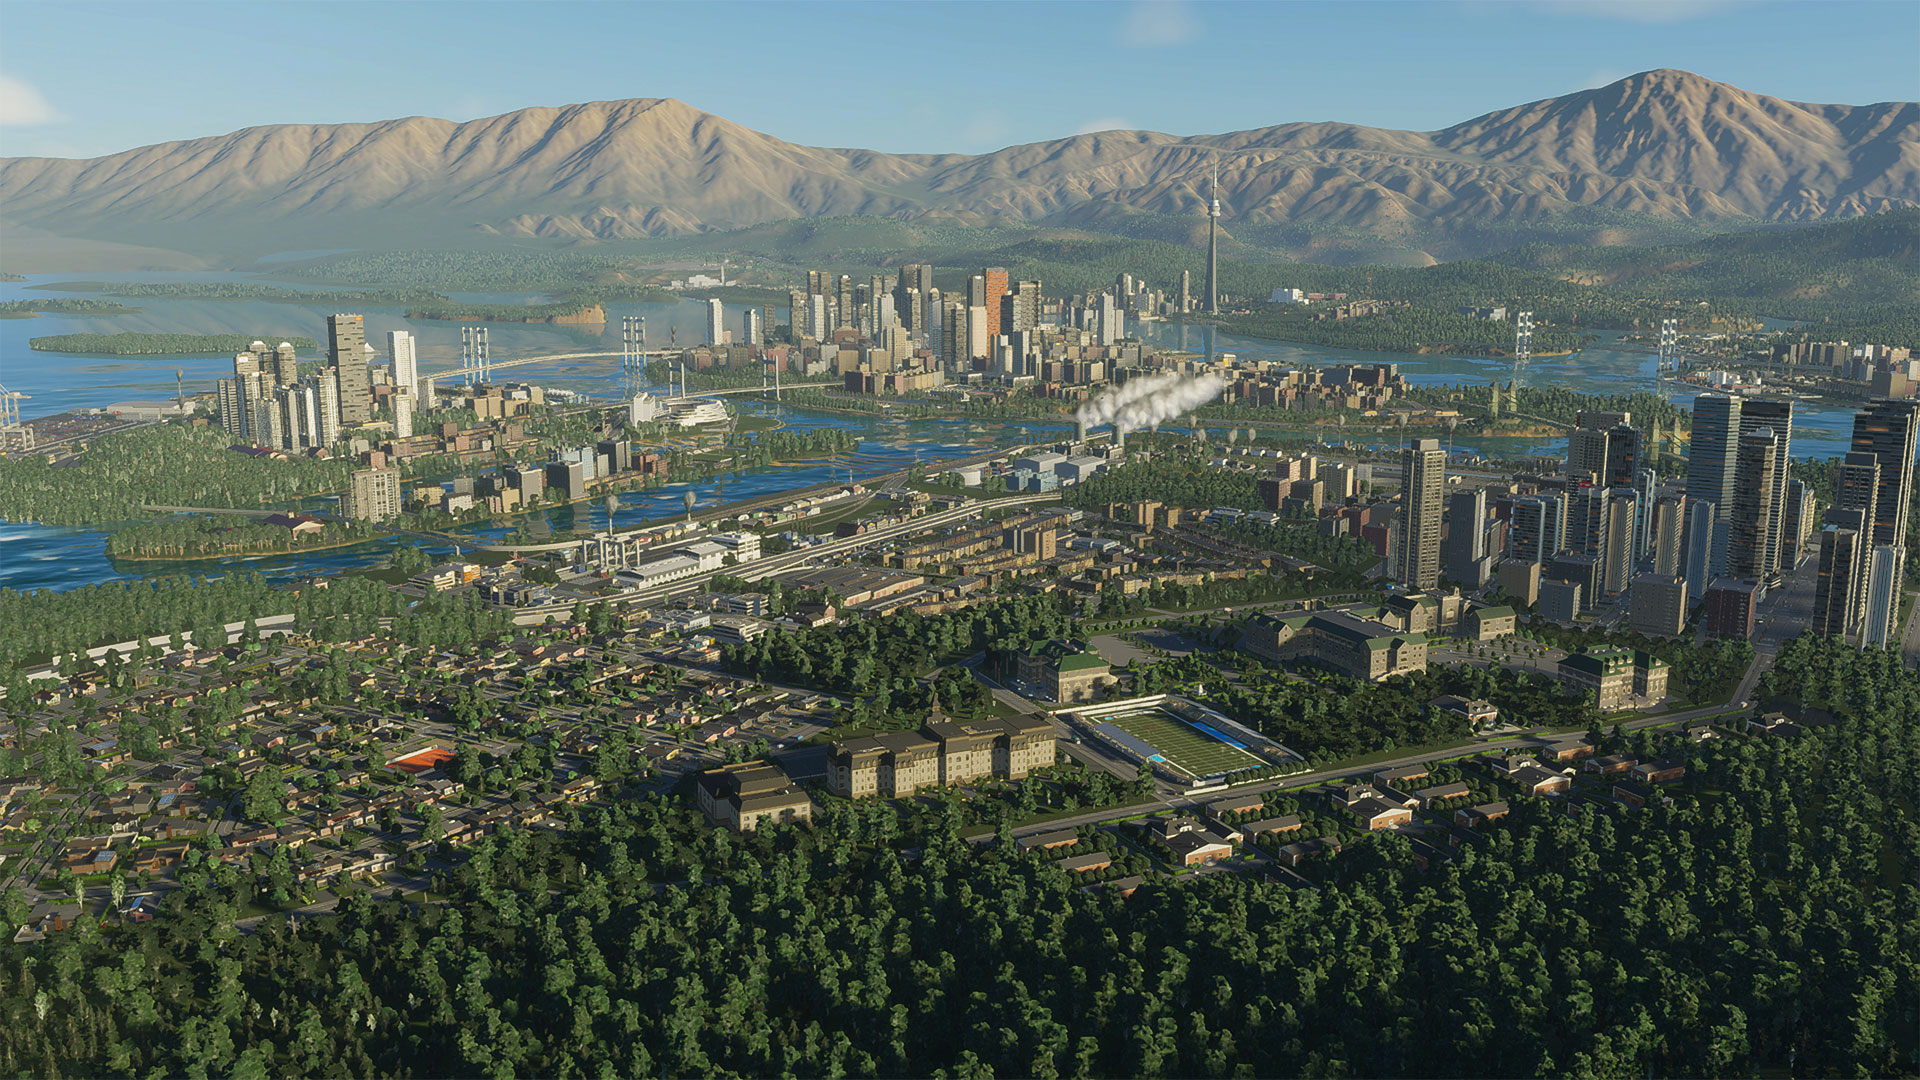 Expect some performance issues with Cities: Skylines II on PC